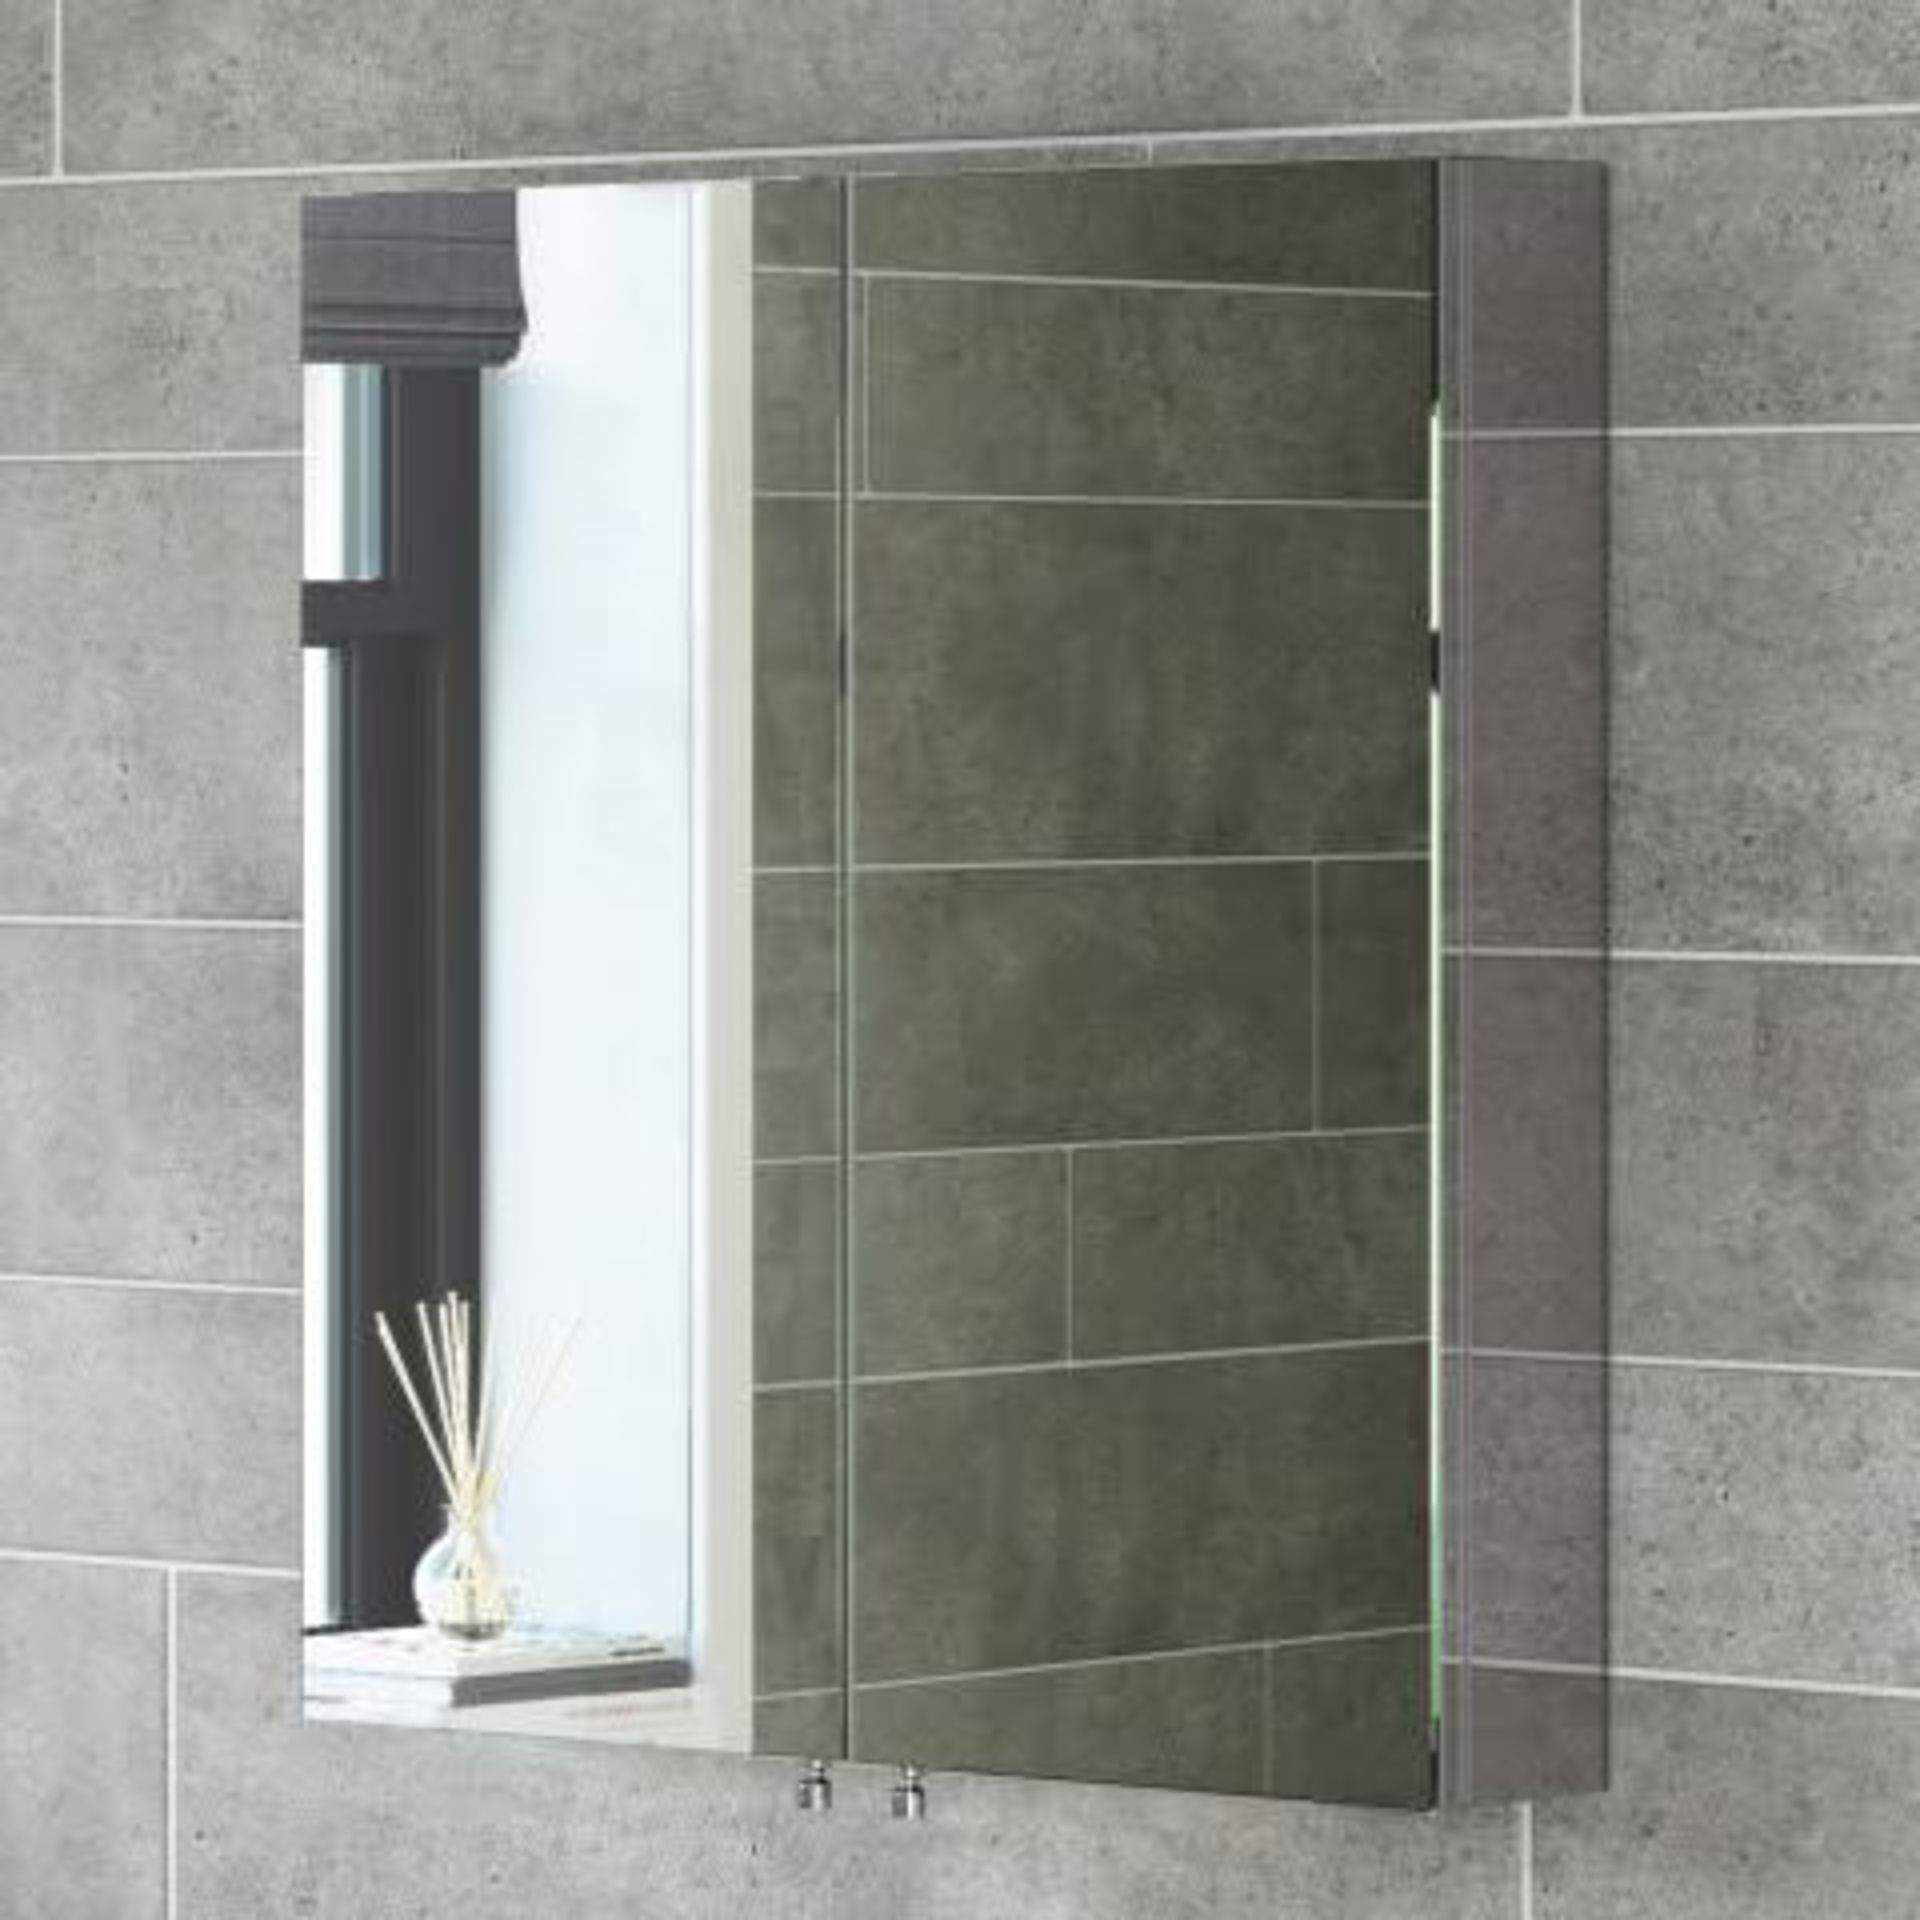 (T200) 670x600mm Liberty Stainless Steel Double Door Mirror Cabinet RRP £262.99 Perfect Reflection - Image 4 of 4